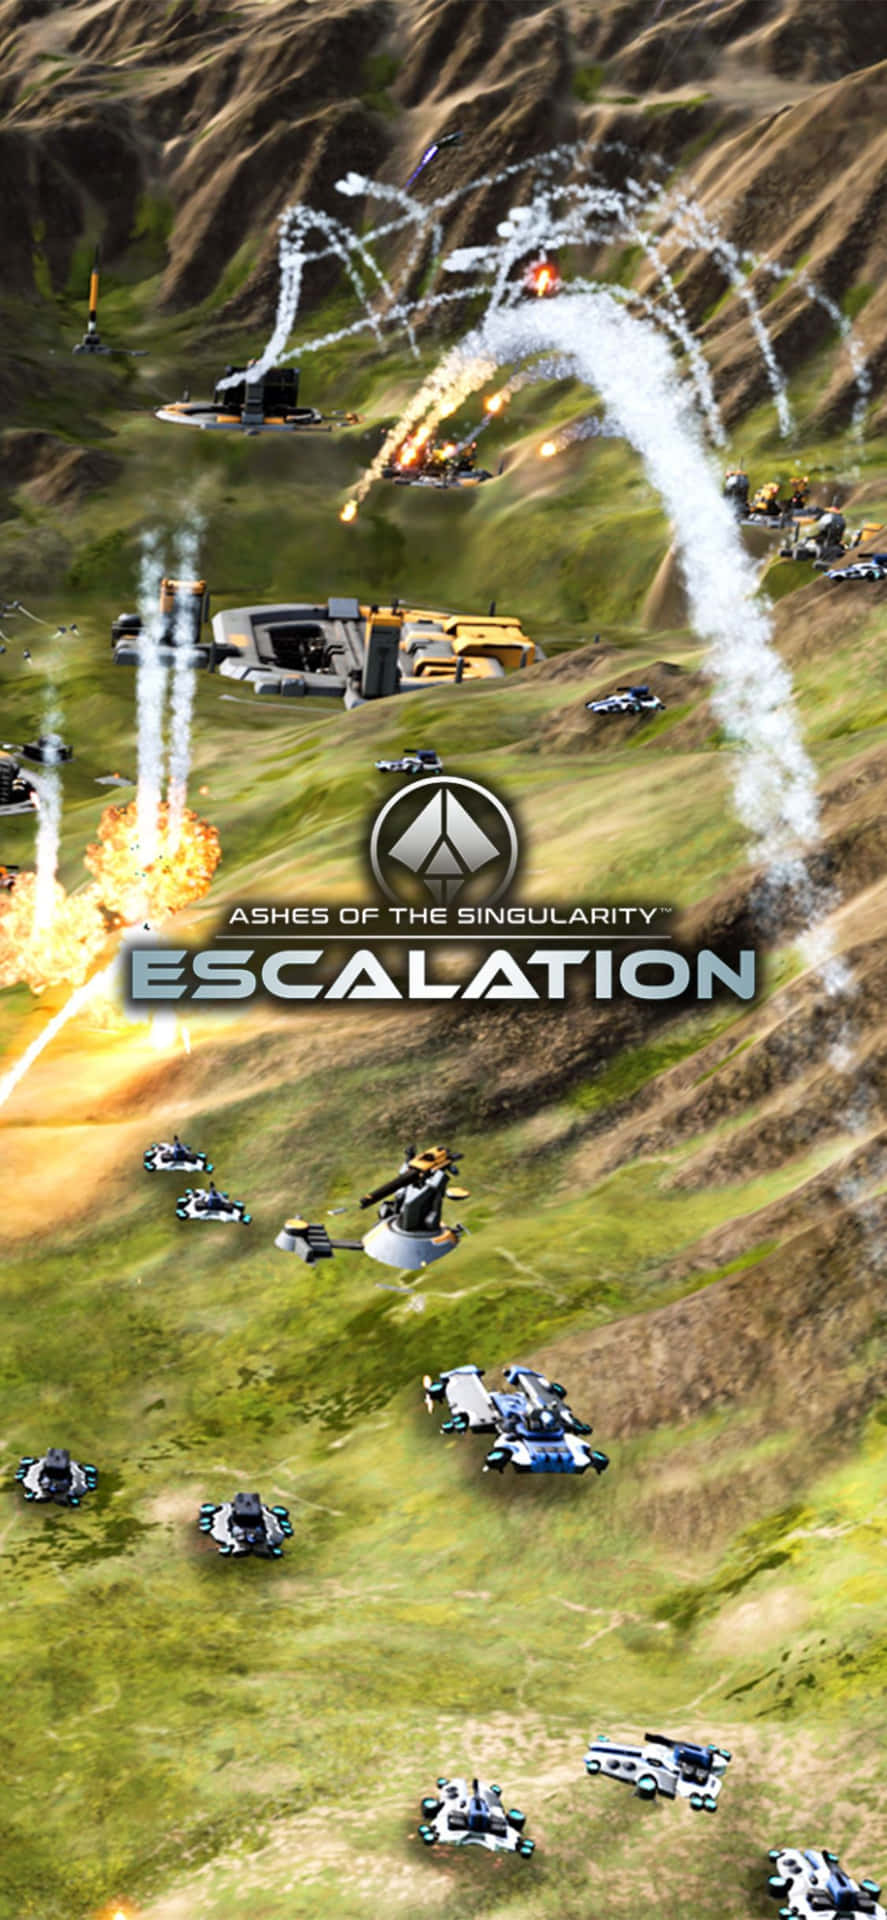 Enjoy Cutting Edge Gaming with Iphone X and Ashes of the Singularity Escalation